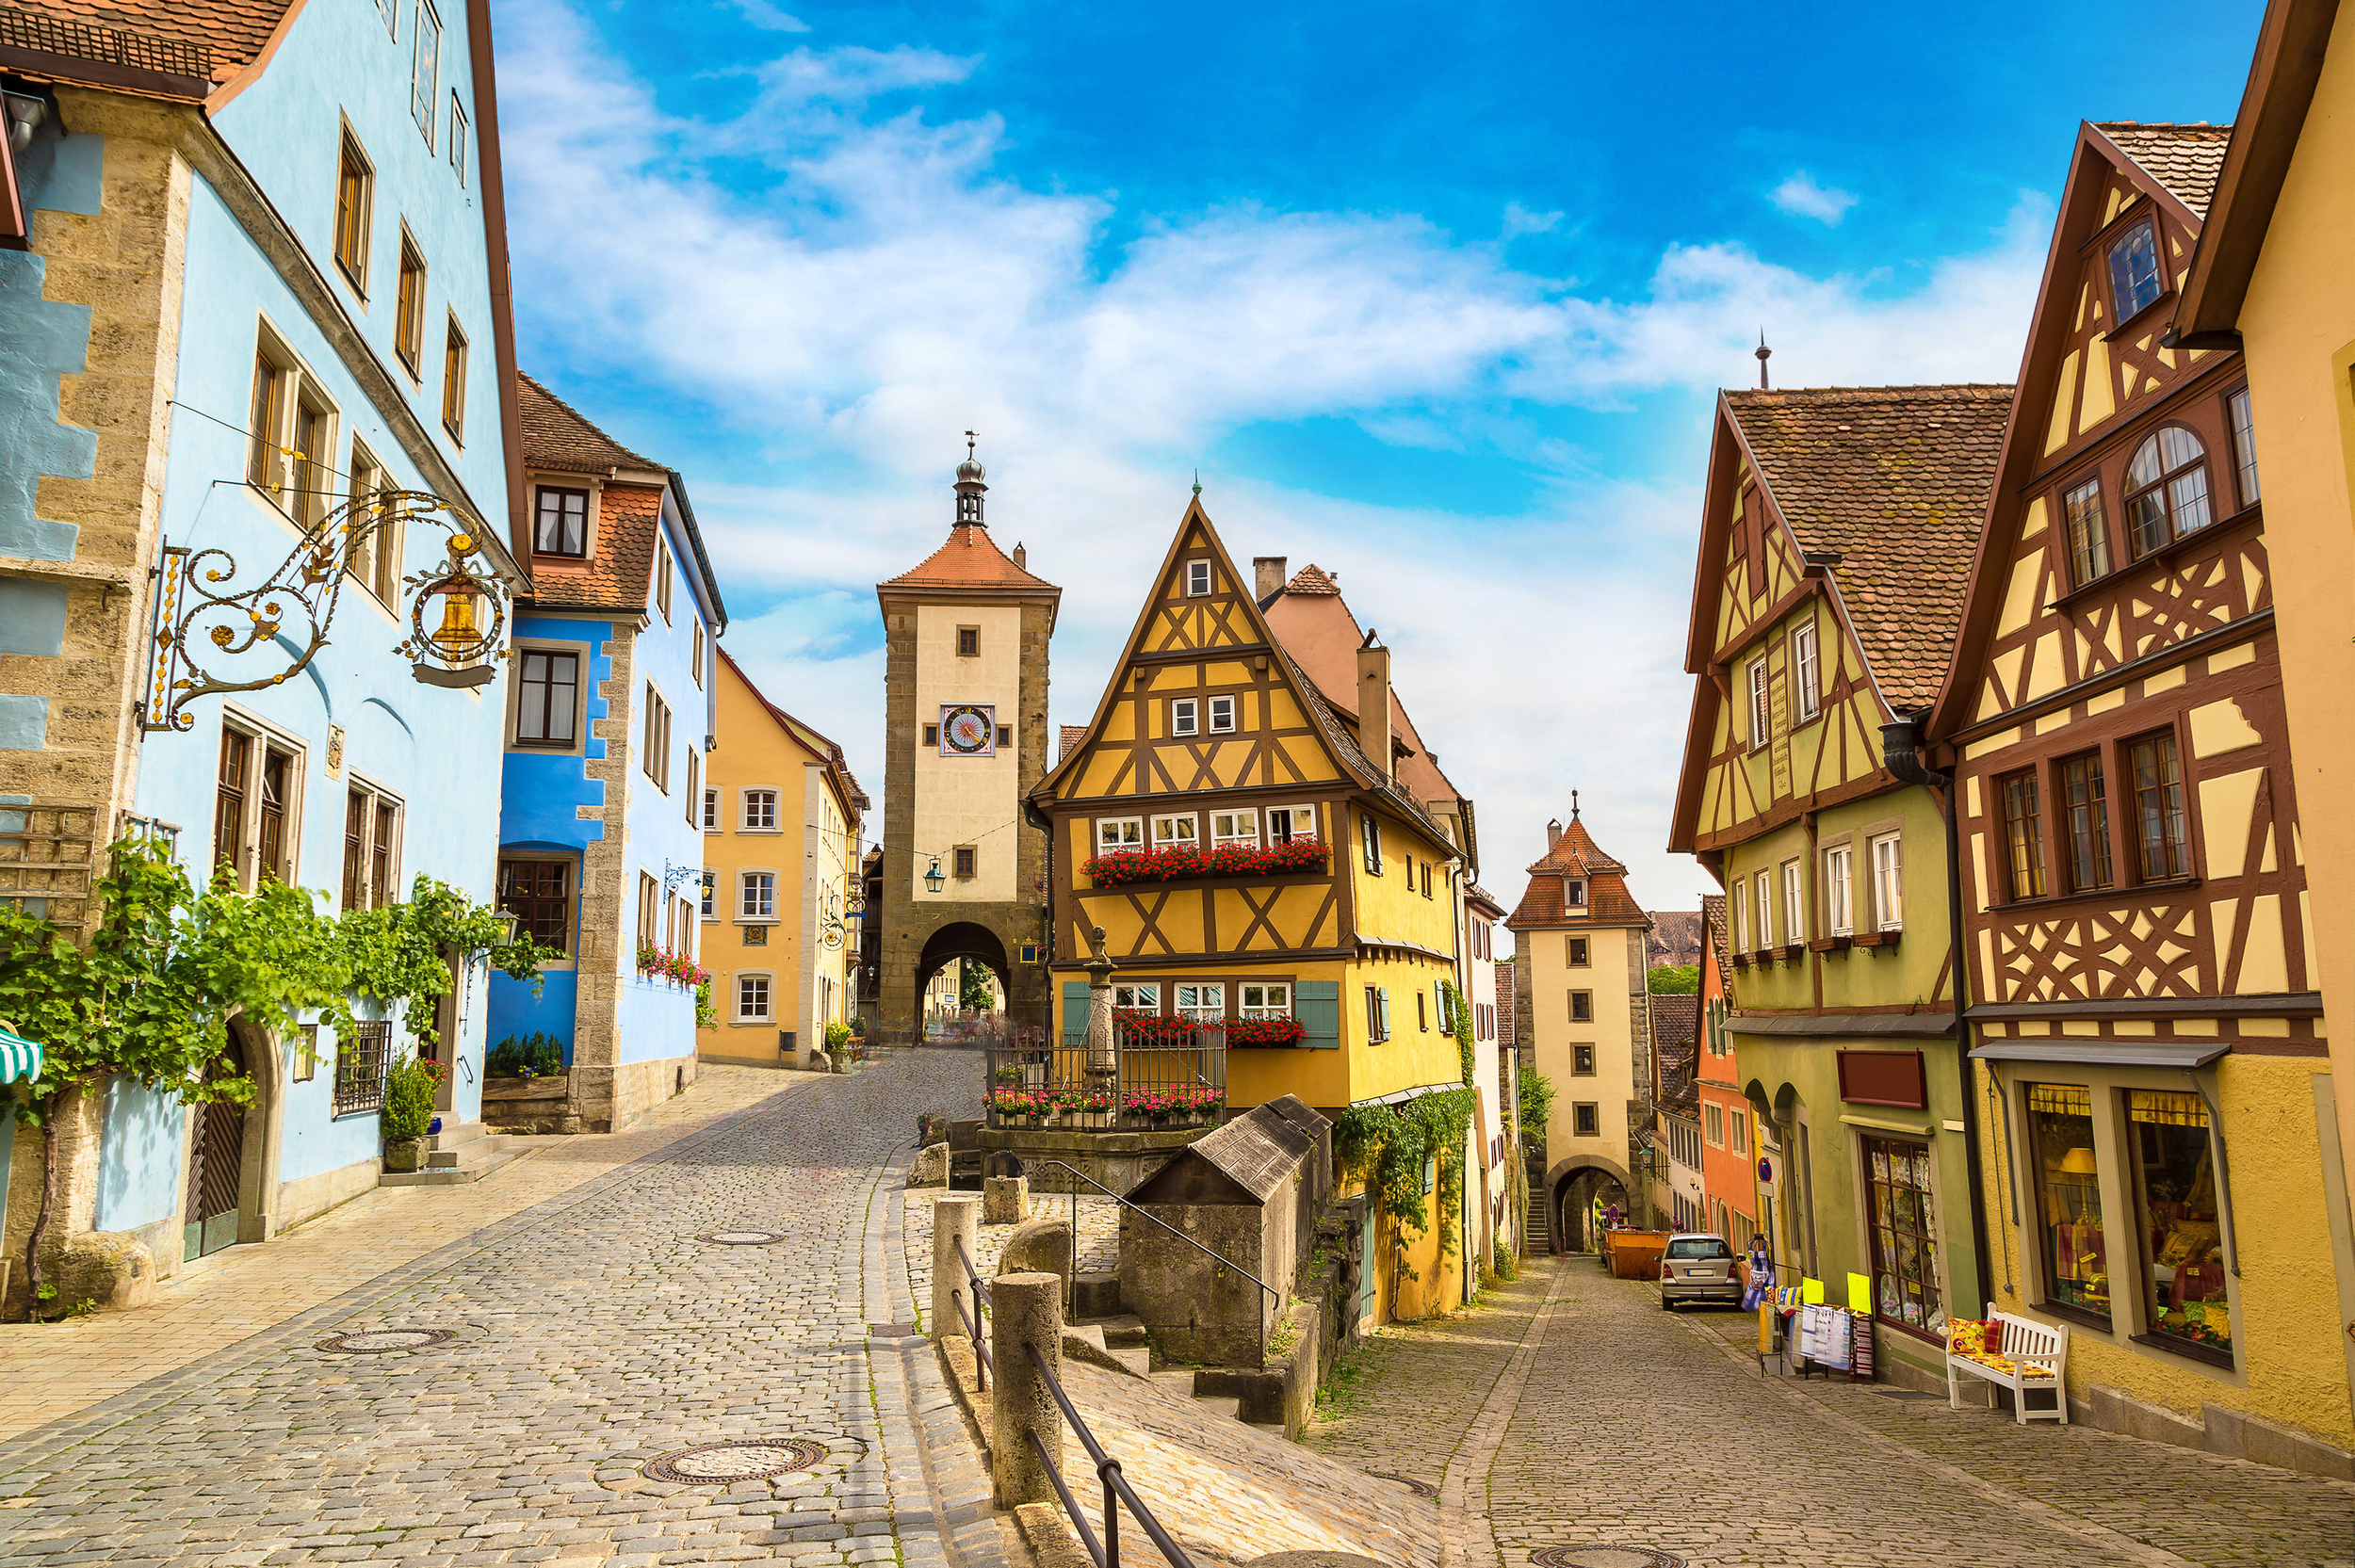 <p>This route weaves through two southern provinces, Bavaria and Baden-Württemberg,<span> and follows an old Roman road. You’ll enjoy stunning views in the Bavarian Alps, storybook castles like Neuschwanstein, and medieval towns like Rothenburg de Tauber.</span></p><p>You may also like: <a href='https://www.yardbarker.com/lifestyle/articles/24_things_you_didnt_know_about_subway_021924/s1__39859605'>24 things you didn’t know about Subway</a></p>